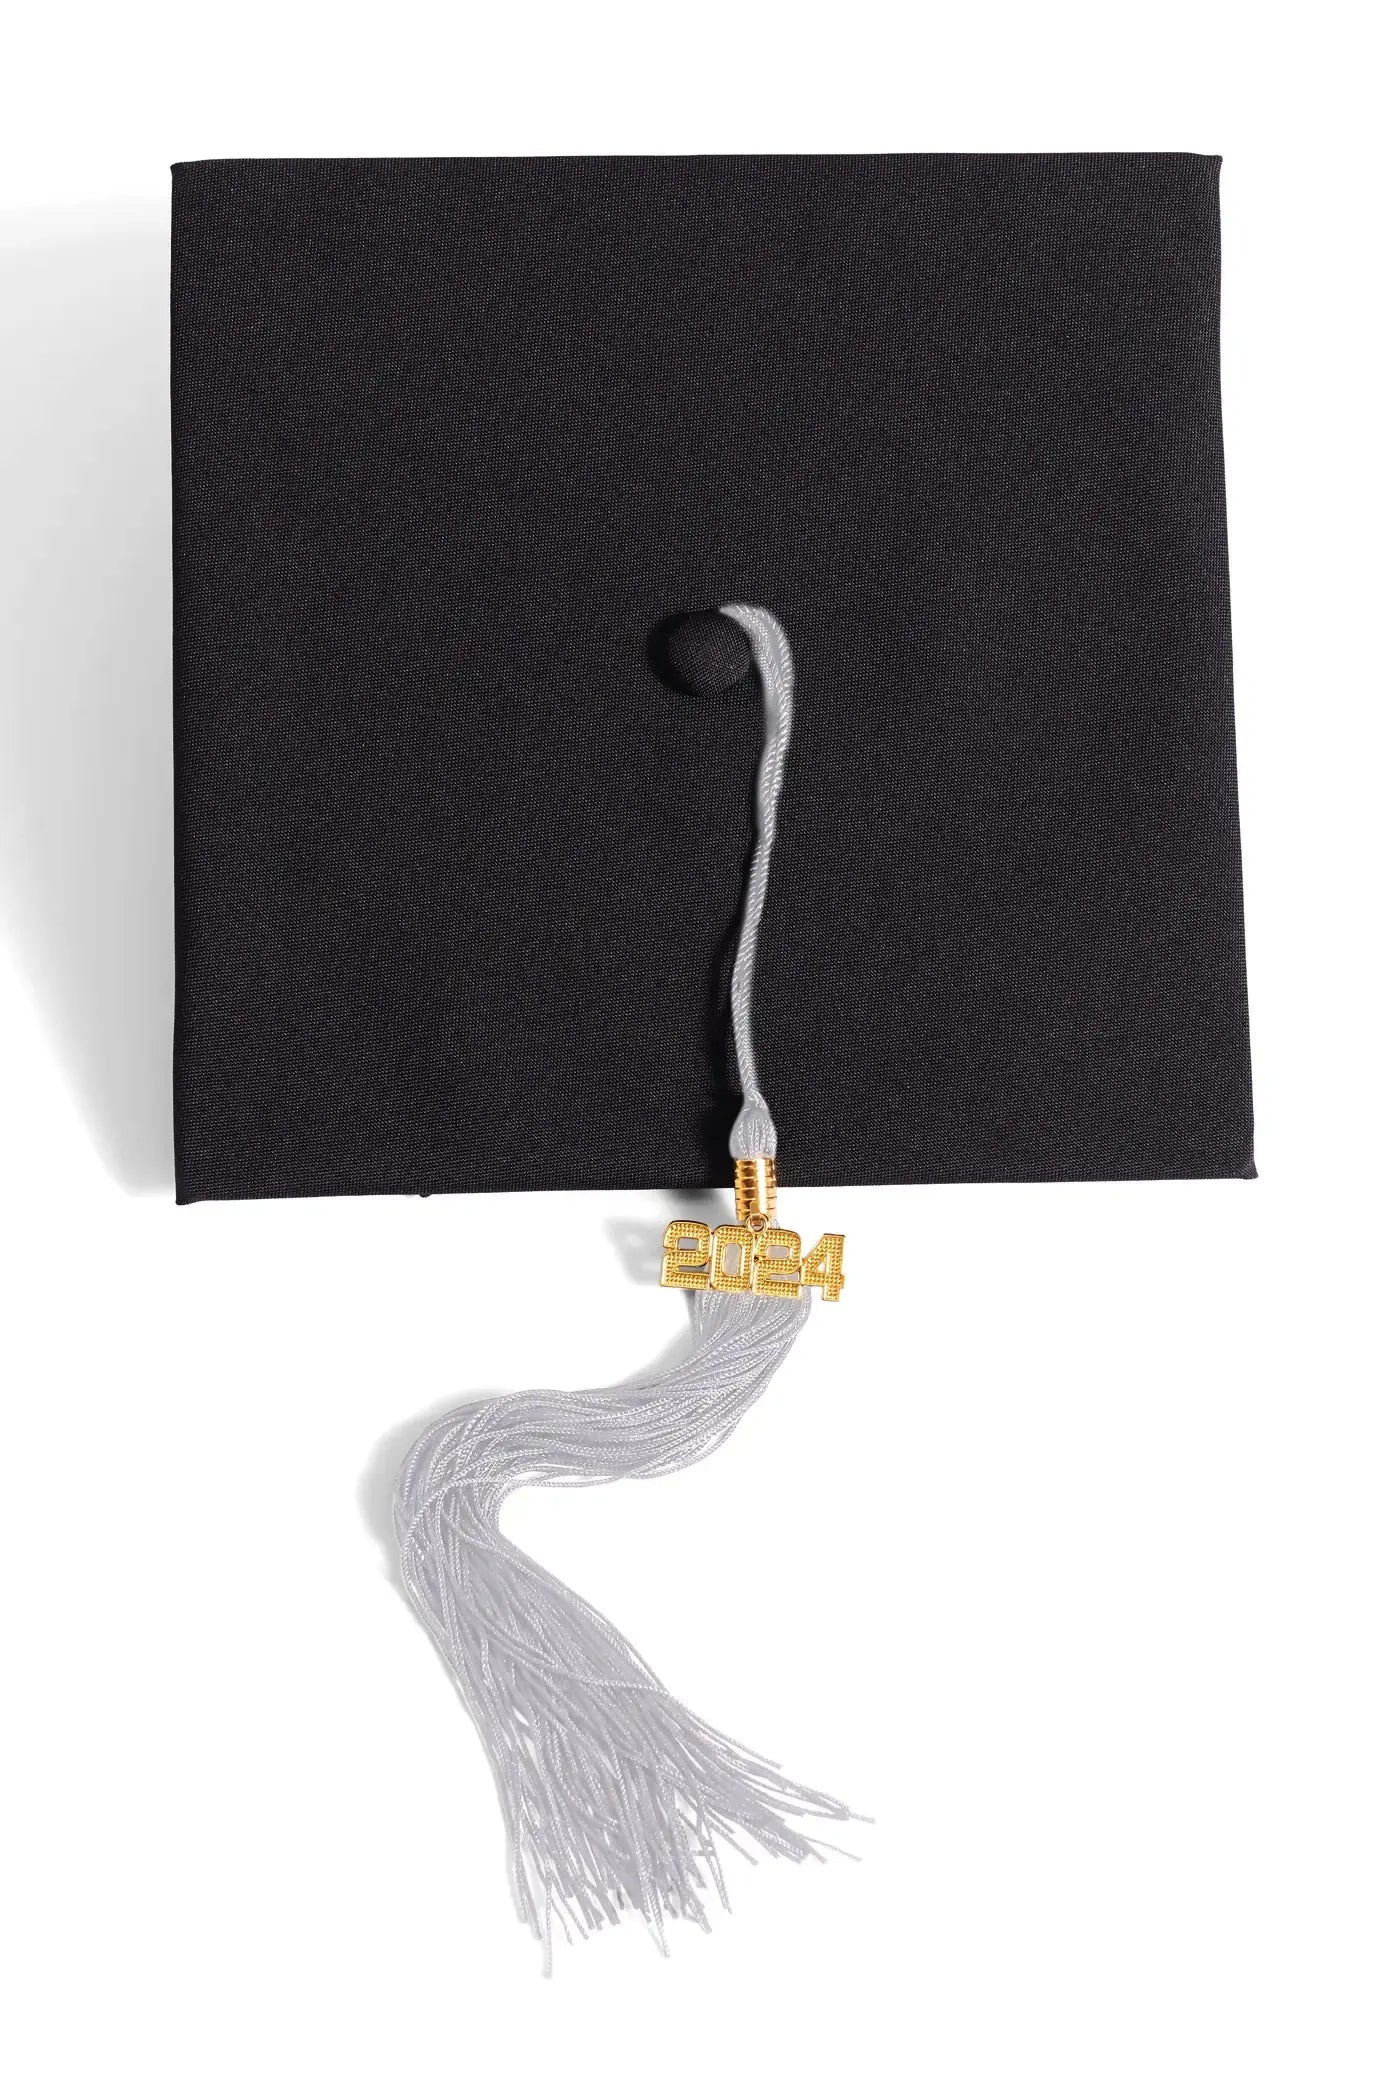 Bachelor's Degree Cap & Gown Set for Indiana University-Bloomington